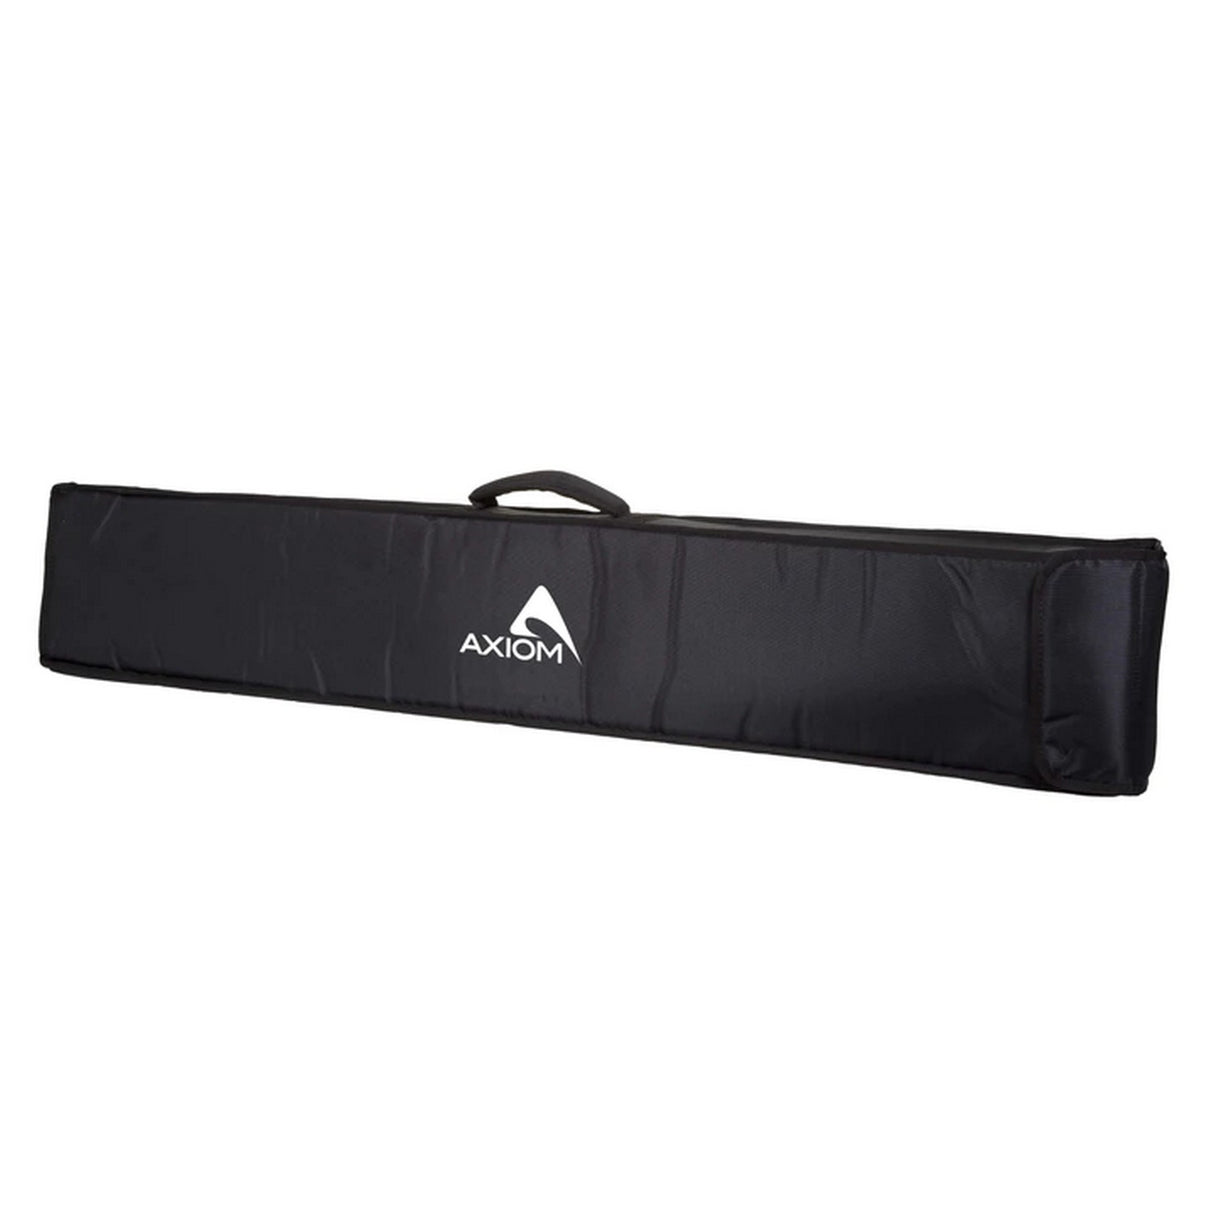 Axiom COVERAX12C Padded Cover for AX12C Line Array